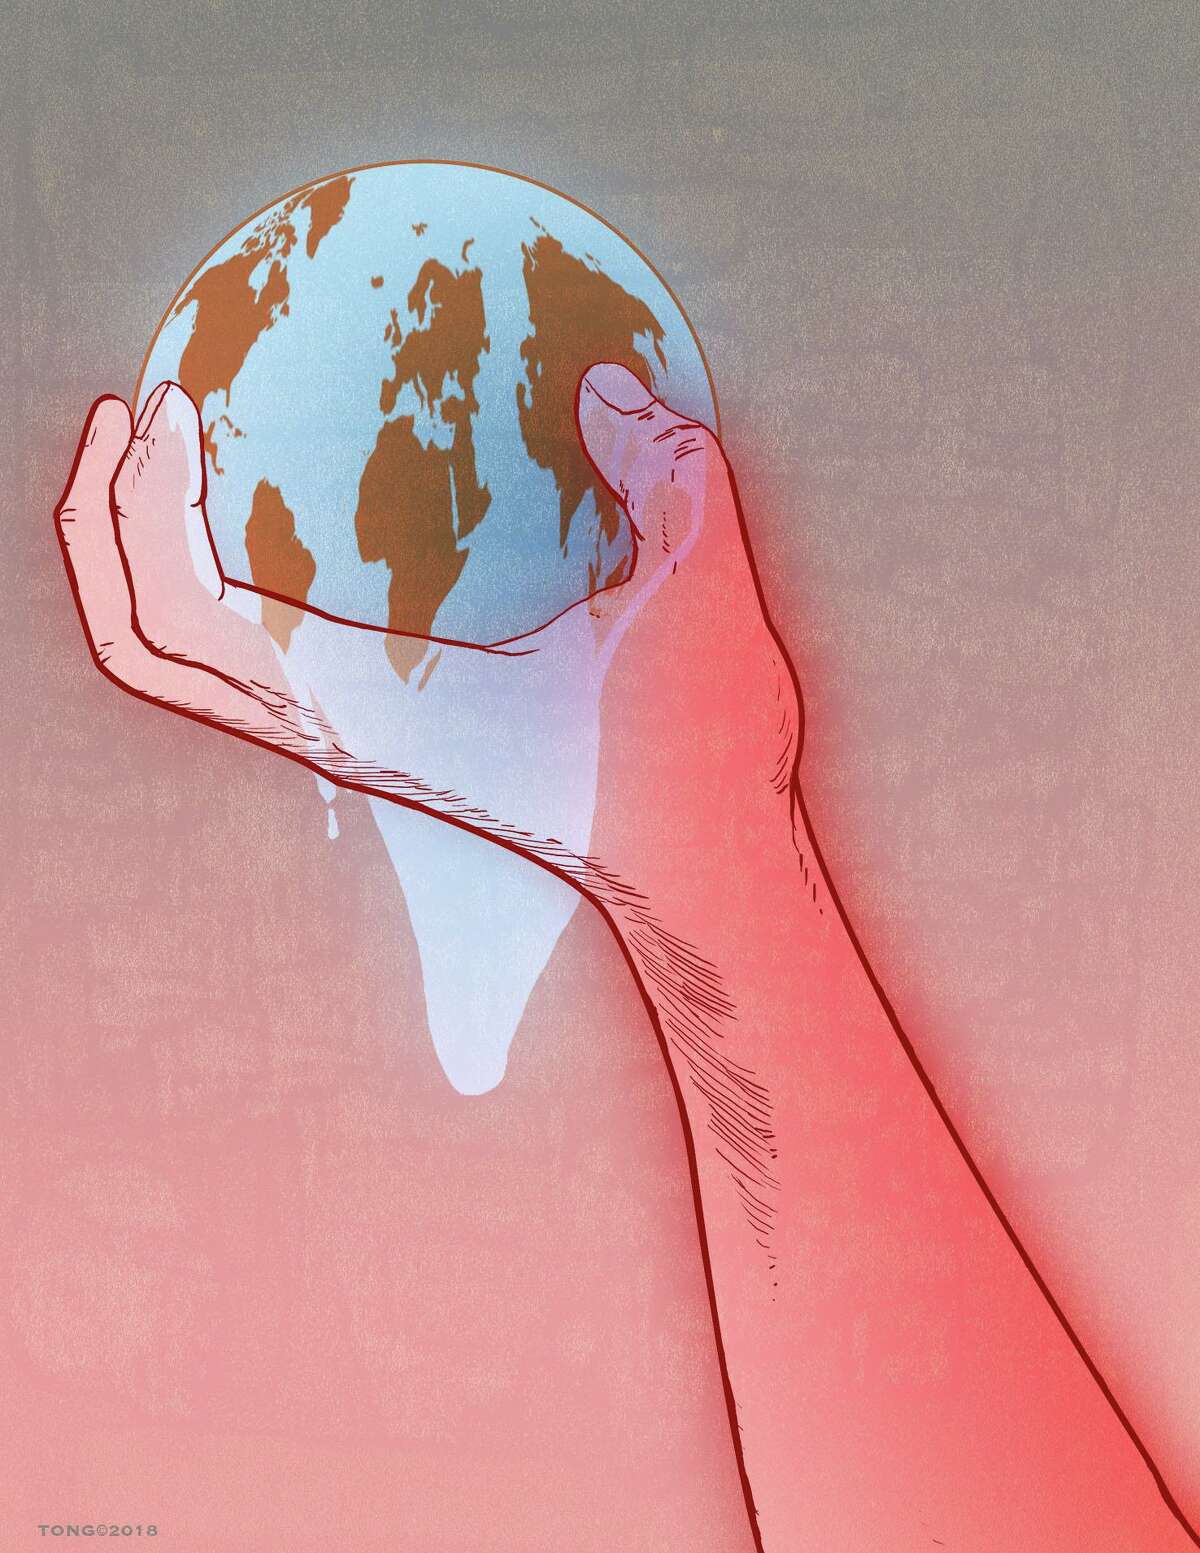 This artwork by Paul Tong refers to the United Nations’ Climate Report, which calls for immediate action to stop drastic effects from Global Warming.